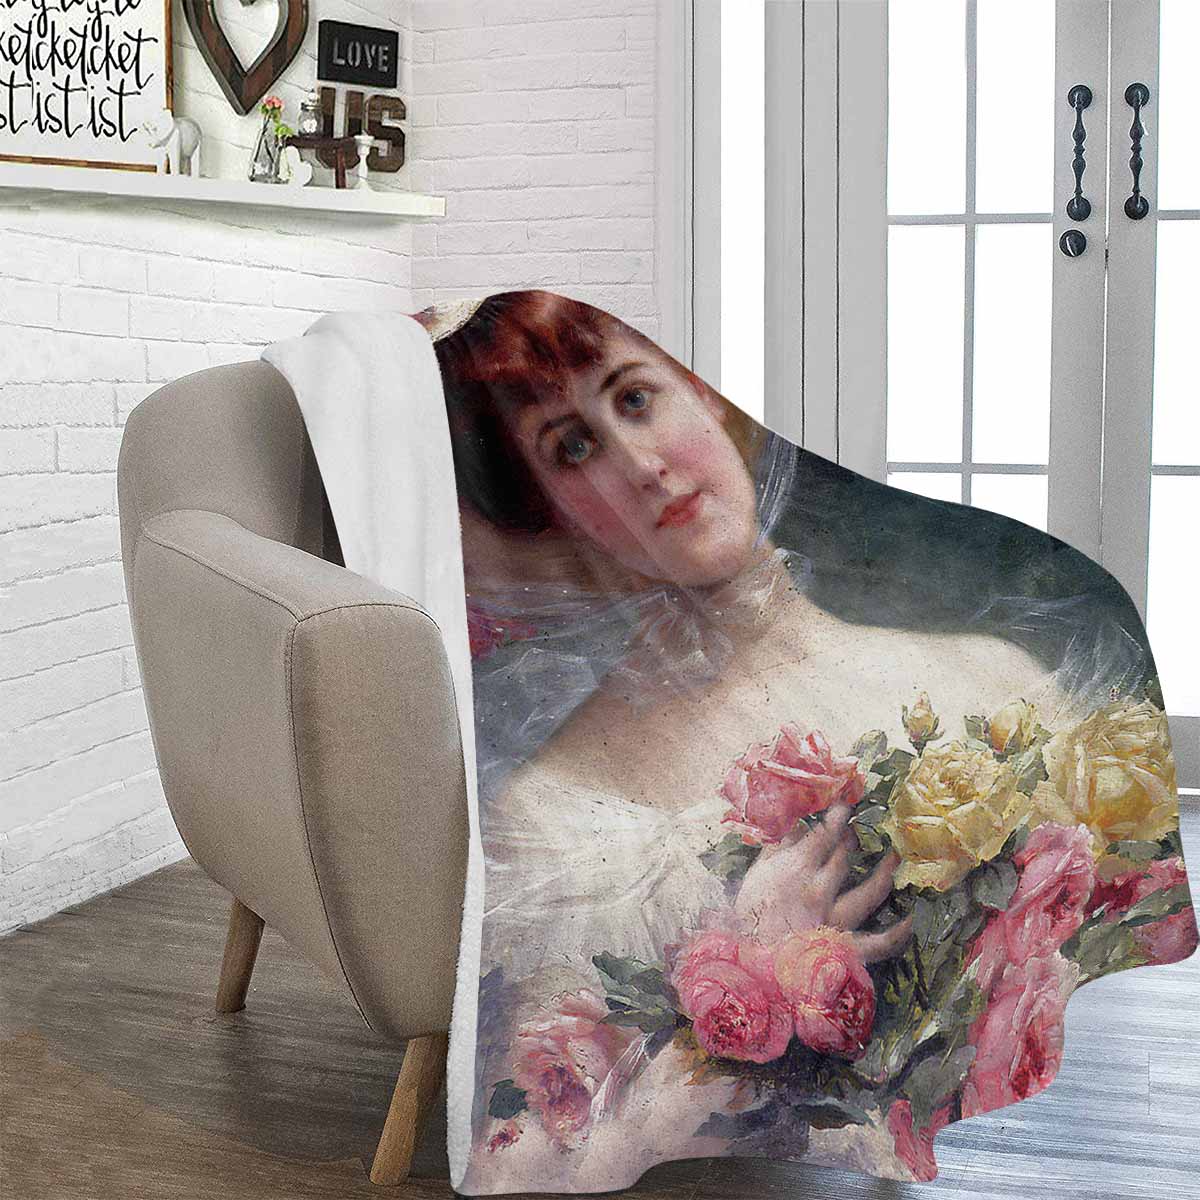 Victorian Lady Design BLANKET, LARGE 60 in x 80 in, BEAUTY WITH FLOWERS